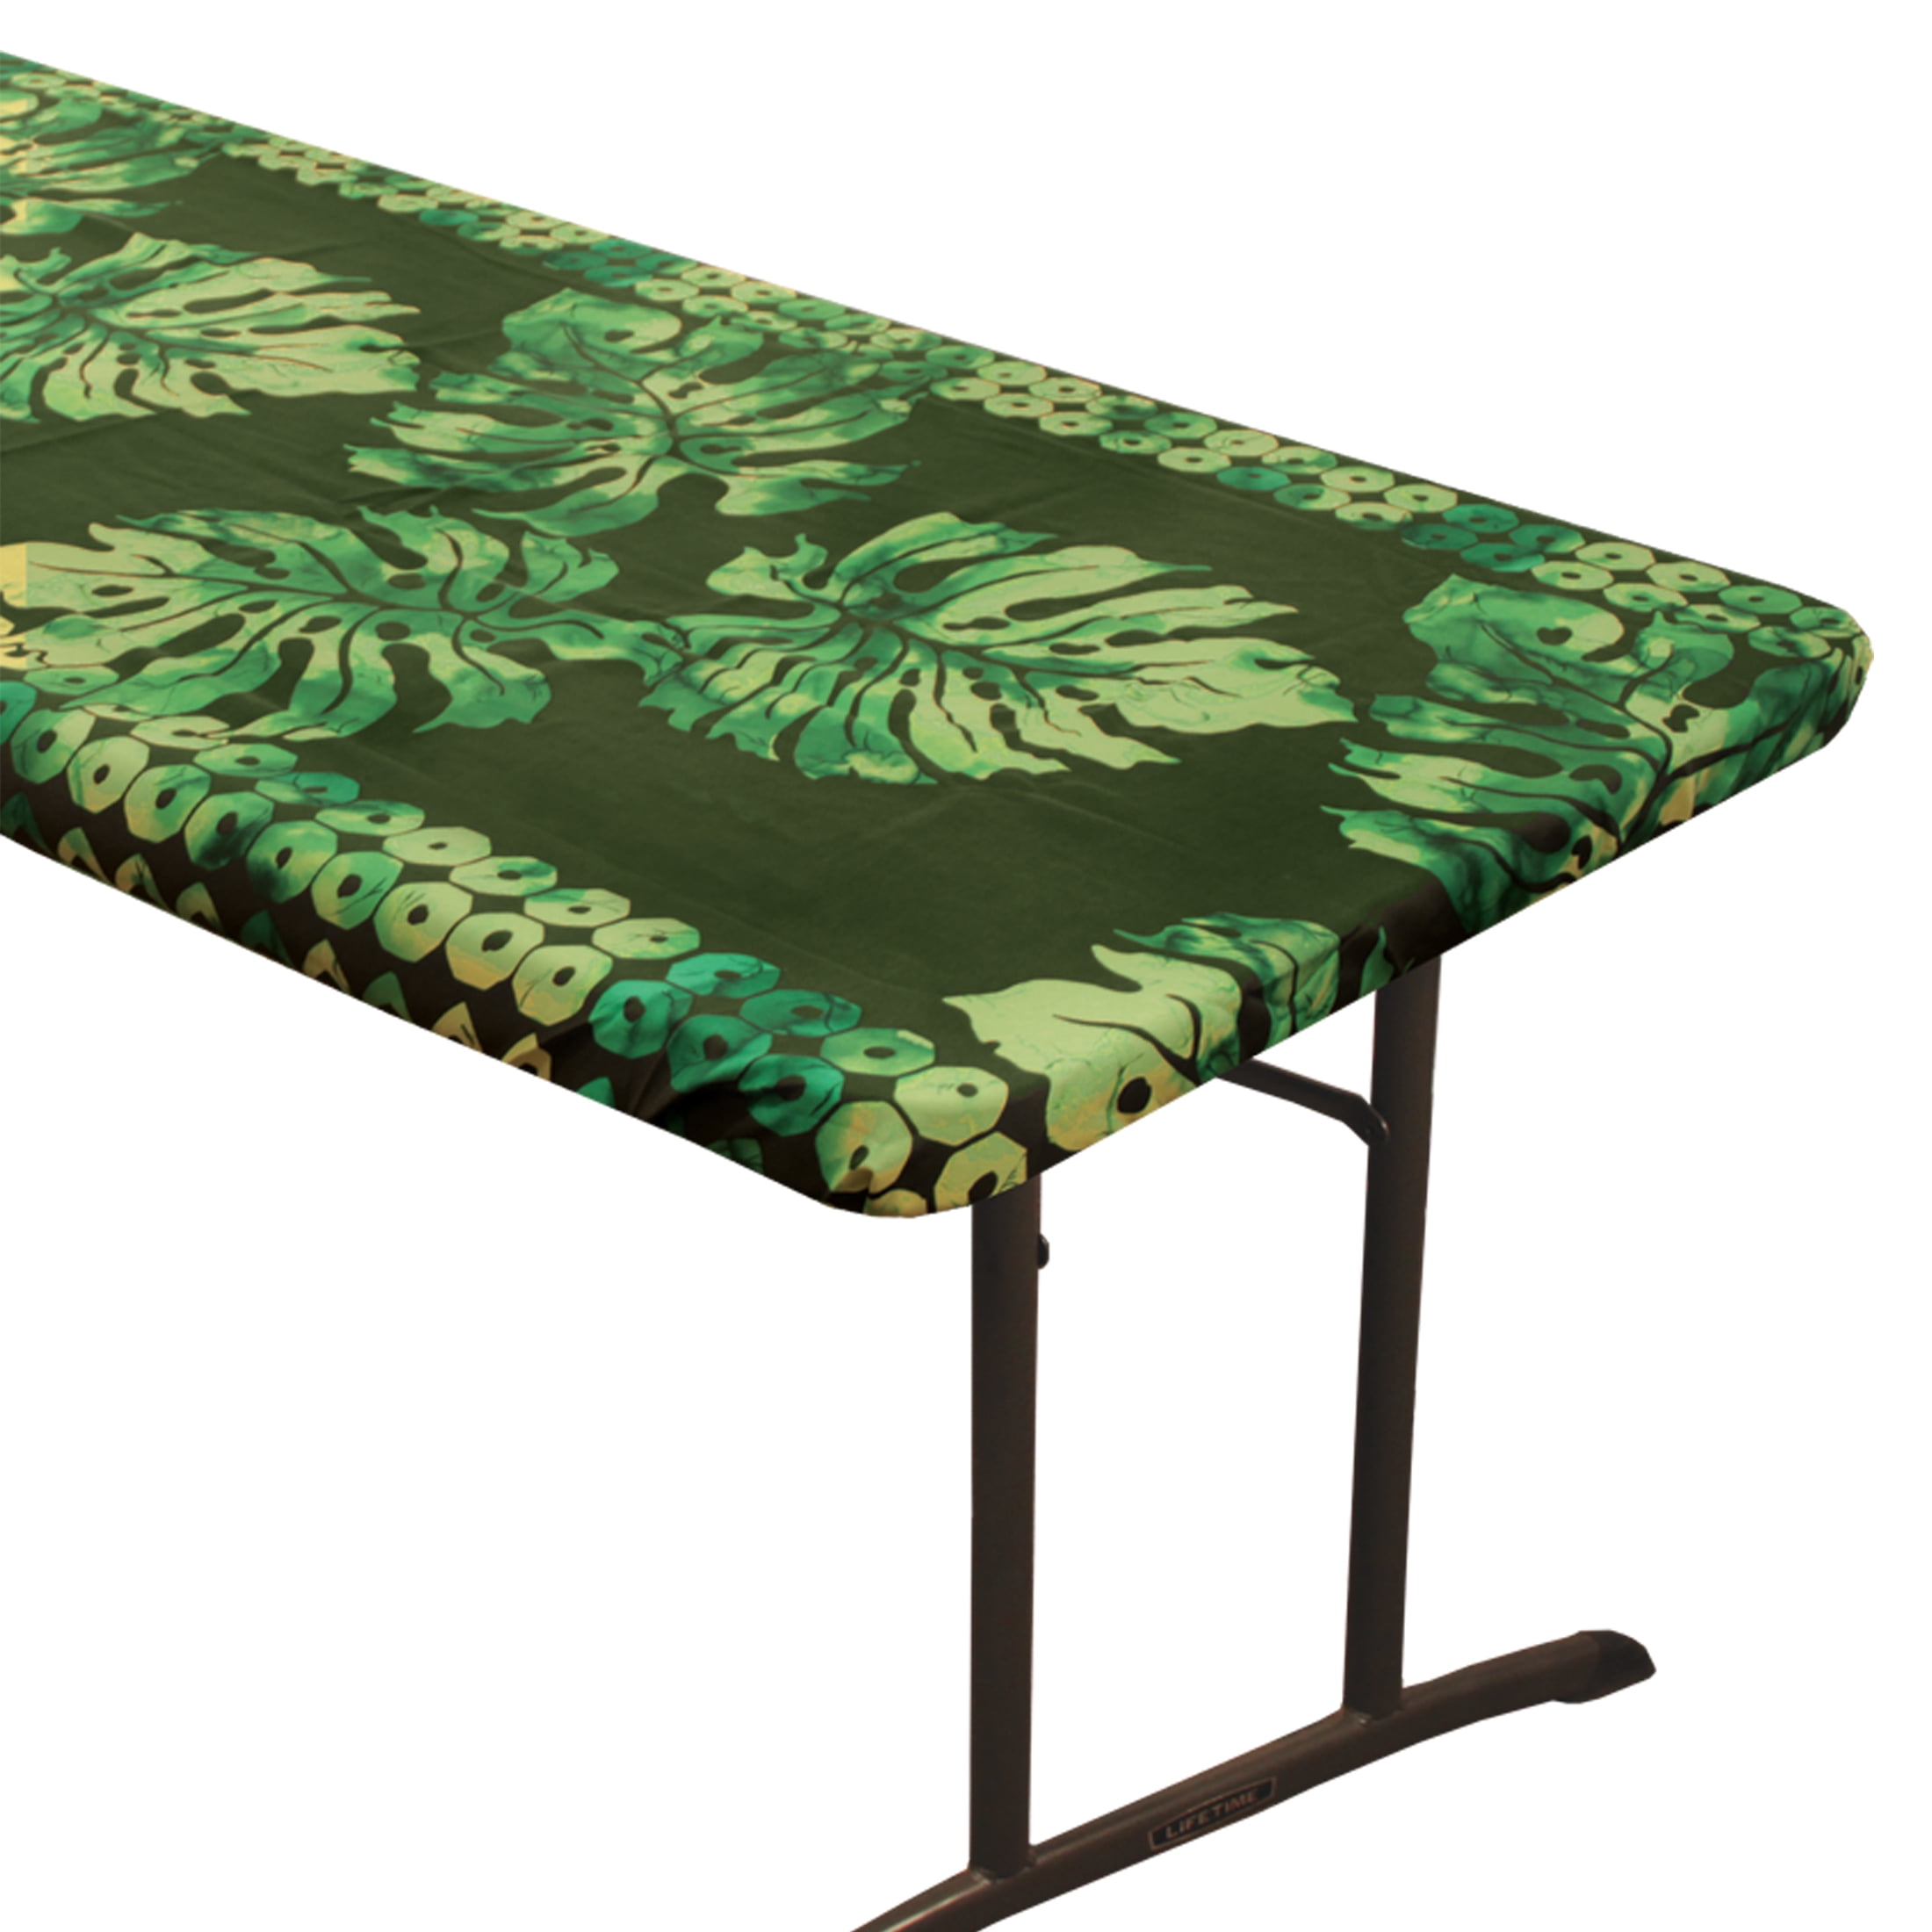 Hawaiian fitted tablecloth Luau Party 6 foot picnic 72 x30" center folding table